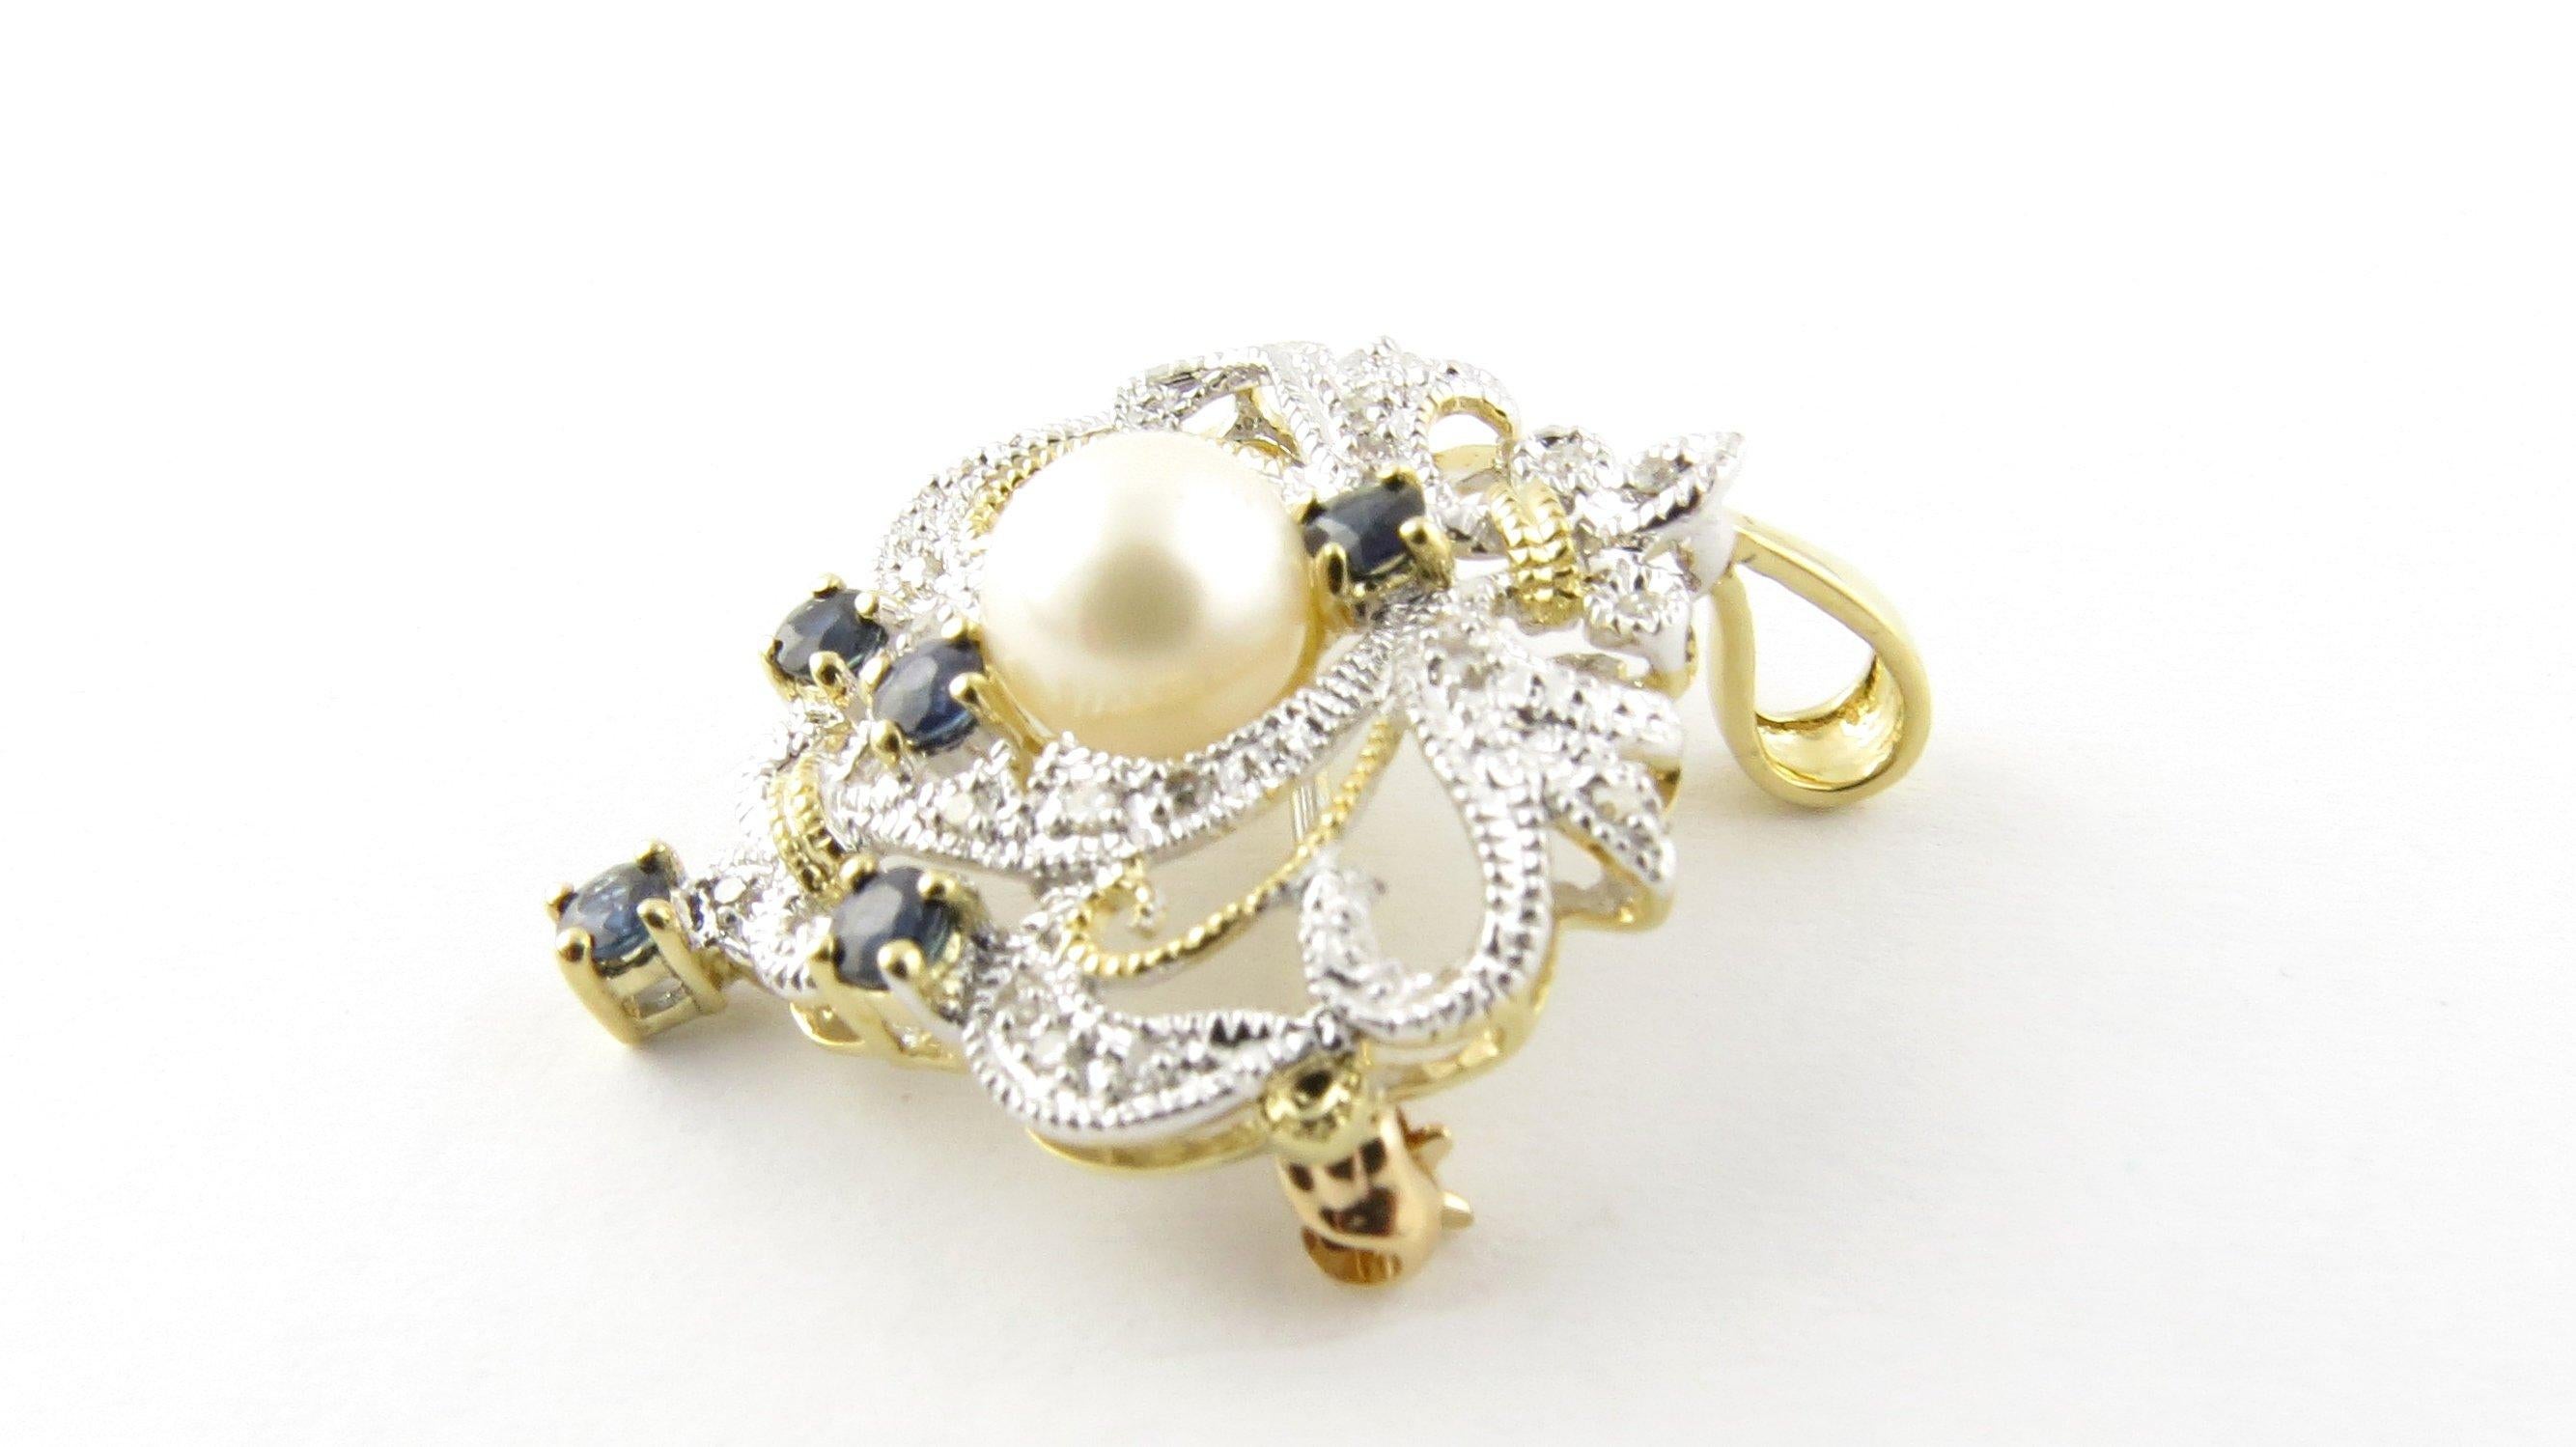 Vintage 14 Karat White and Yellow Gold Diamond, Sapphire and Pearl Brooch/Pendant- 
This stunning piece features 22 round brilliant cut diamonds, one cultured pearl (7 mm) and five round genuine sapphire set in exquisitely detailed 14K white and